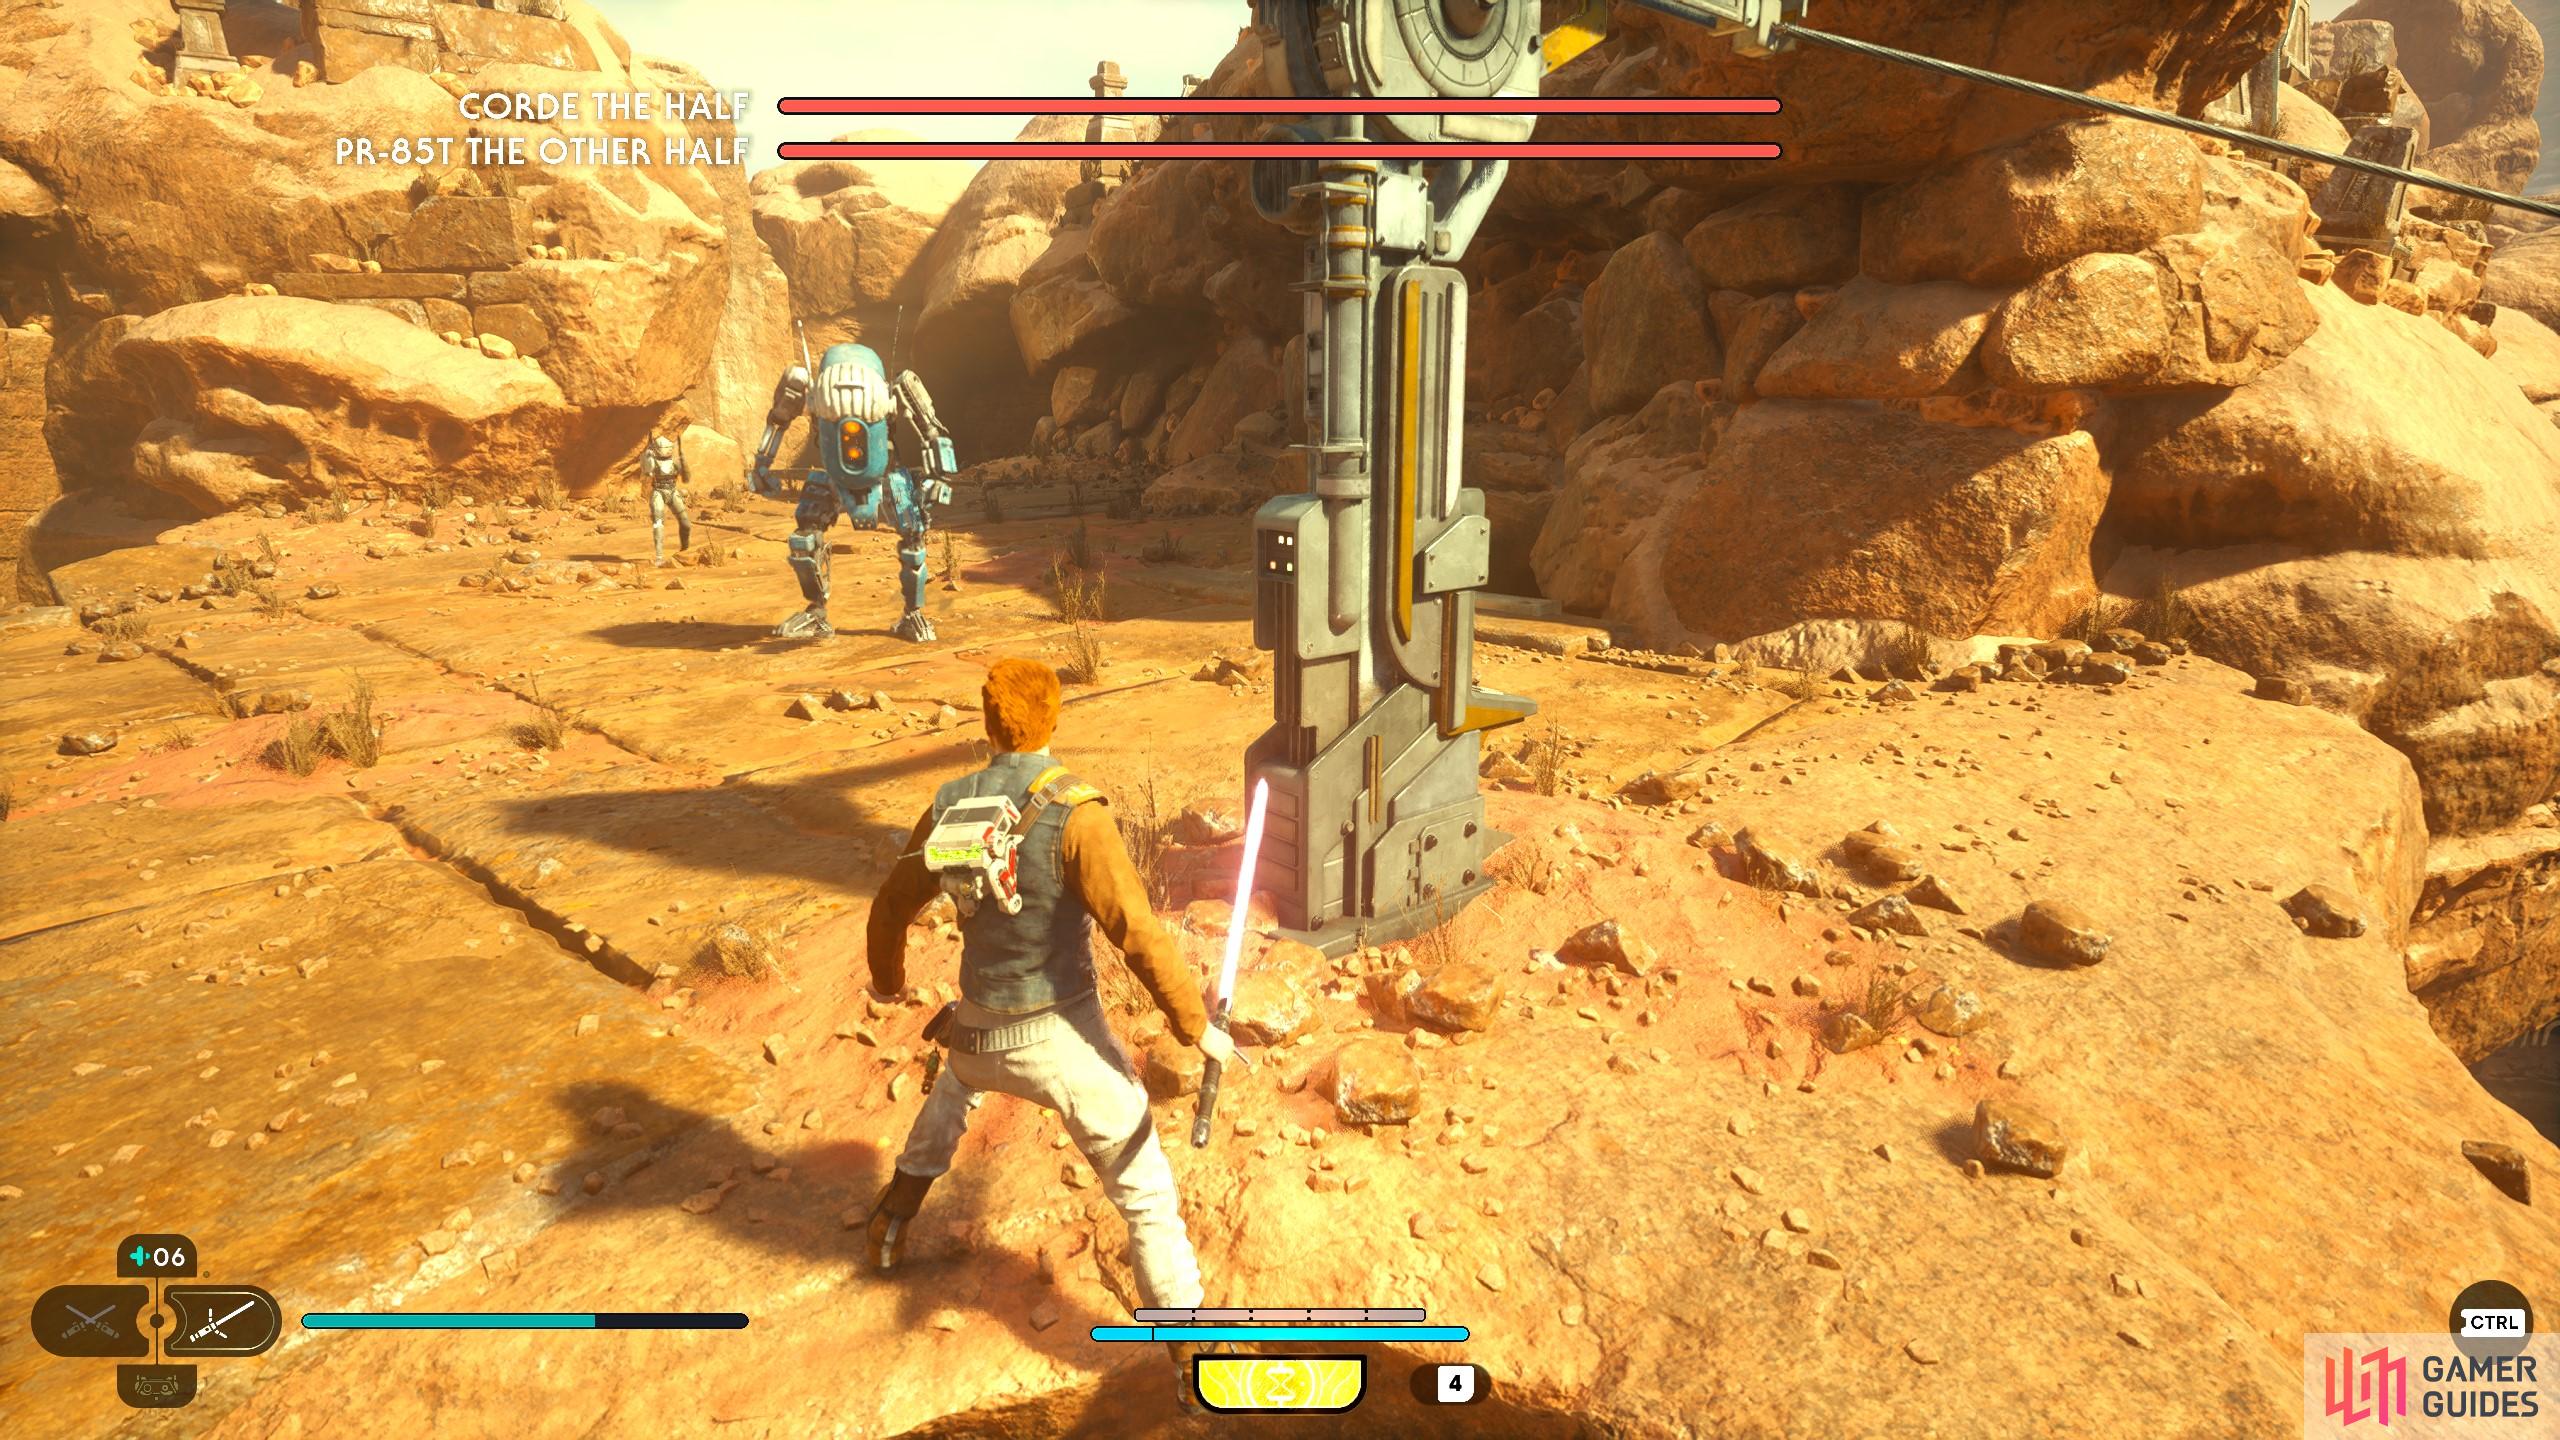 You must even go to other planets to track Bounty Hunter Locations in Jedi Survivor.